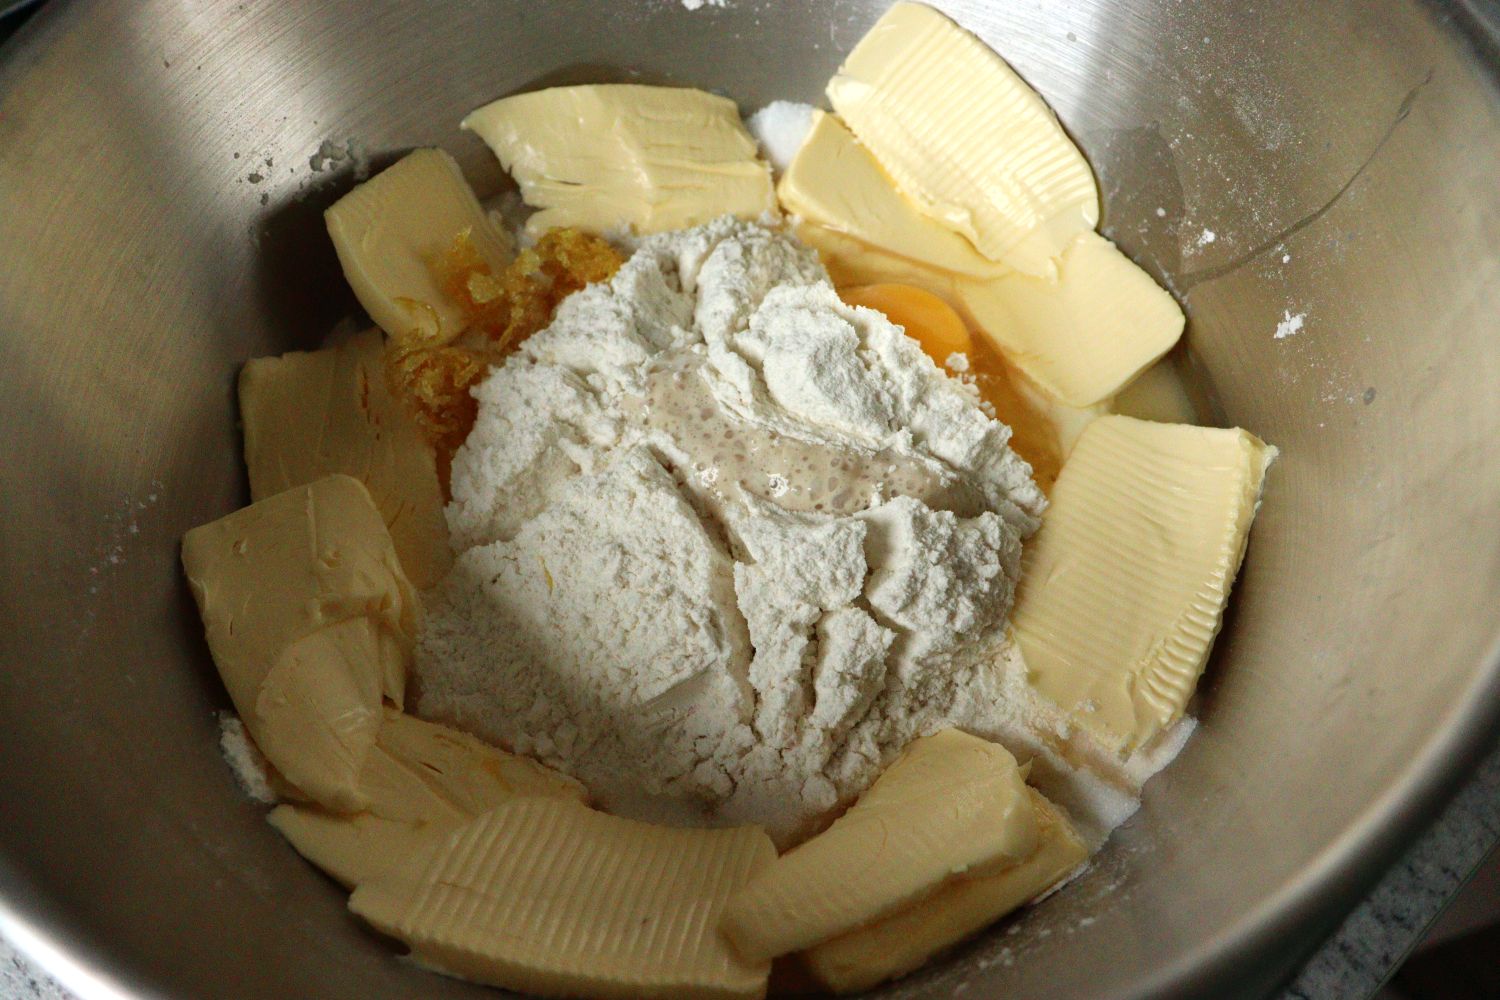 Proofed yeast dough to which butter, egg, sugar, lemon peel and vanilla sugar is added to make a Yeast Dough - Hefeteig used for baking for sweets.